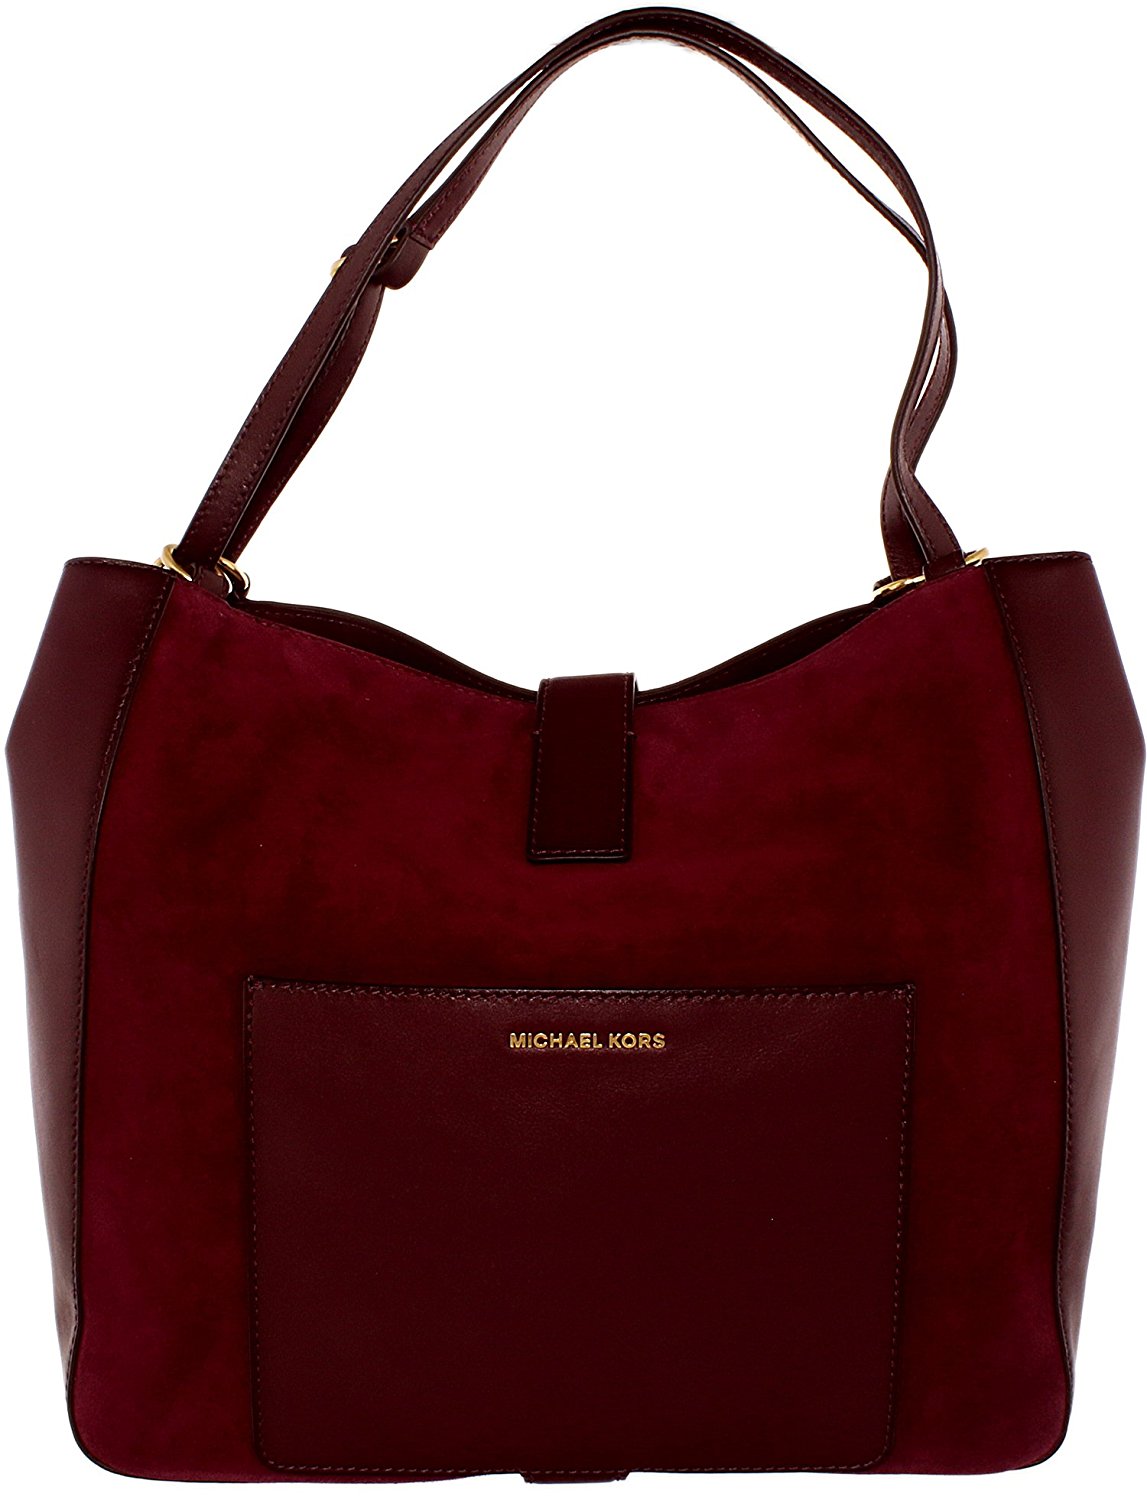 Michael Kors Quincy Large Suede and Leather Shoulder Tote - Maroon -